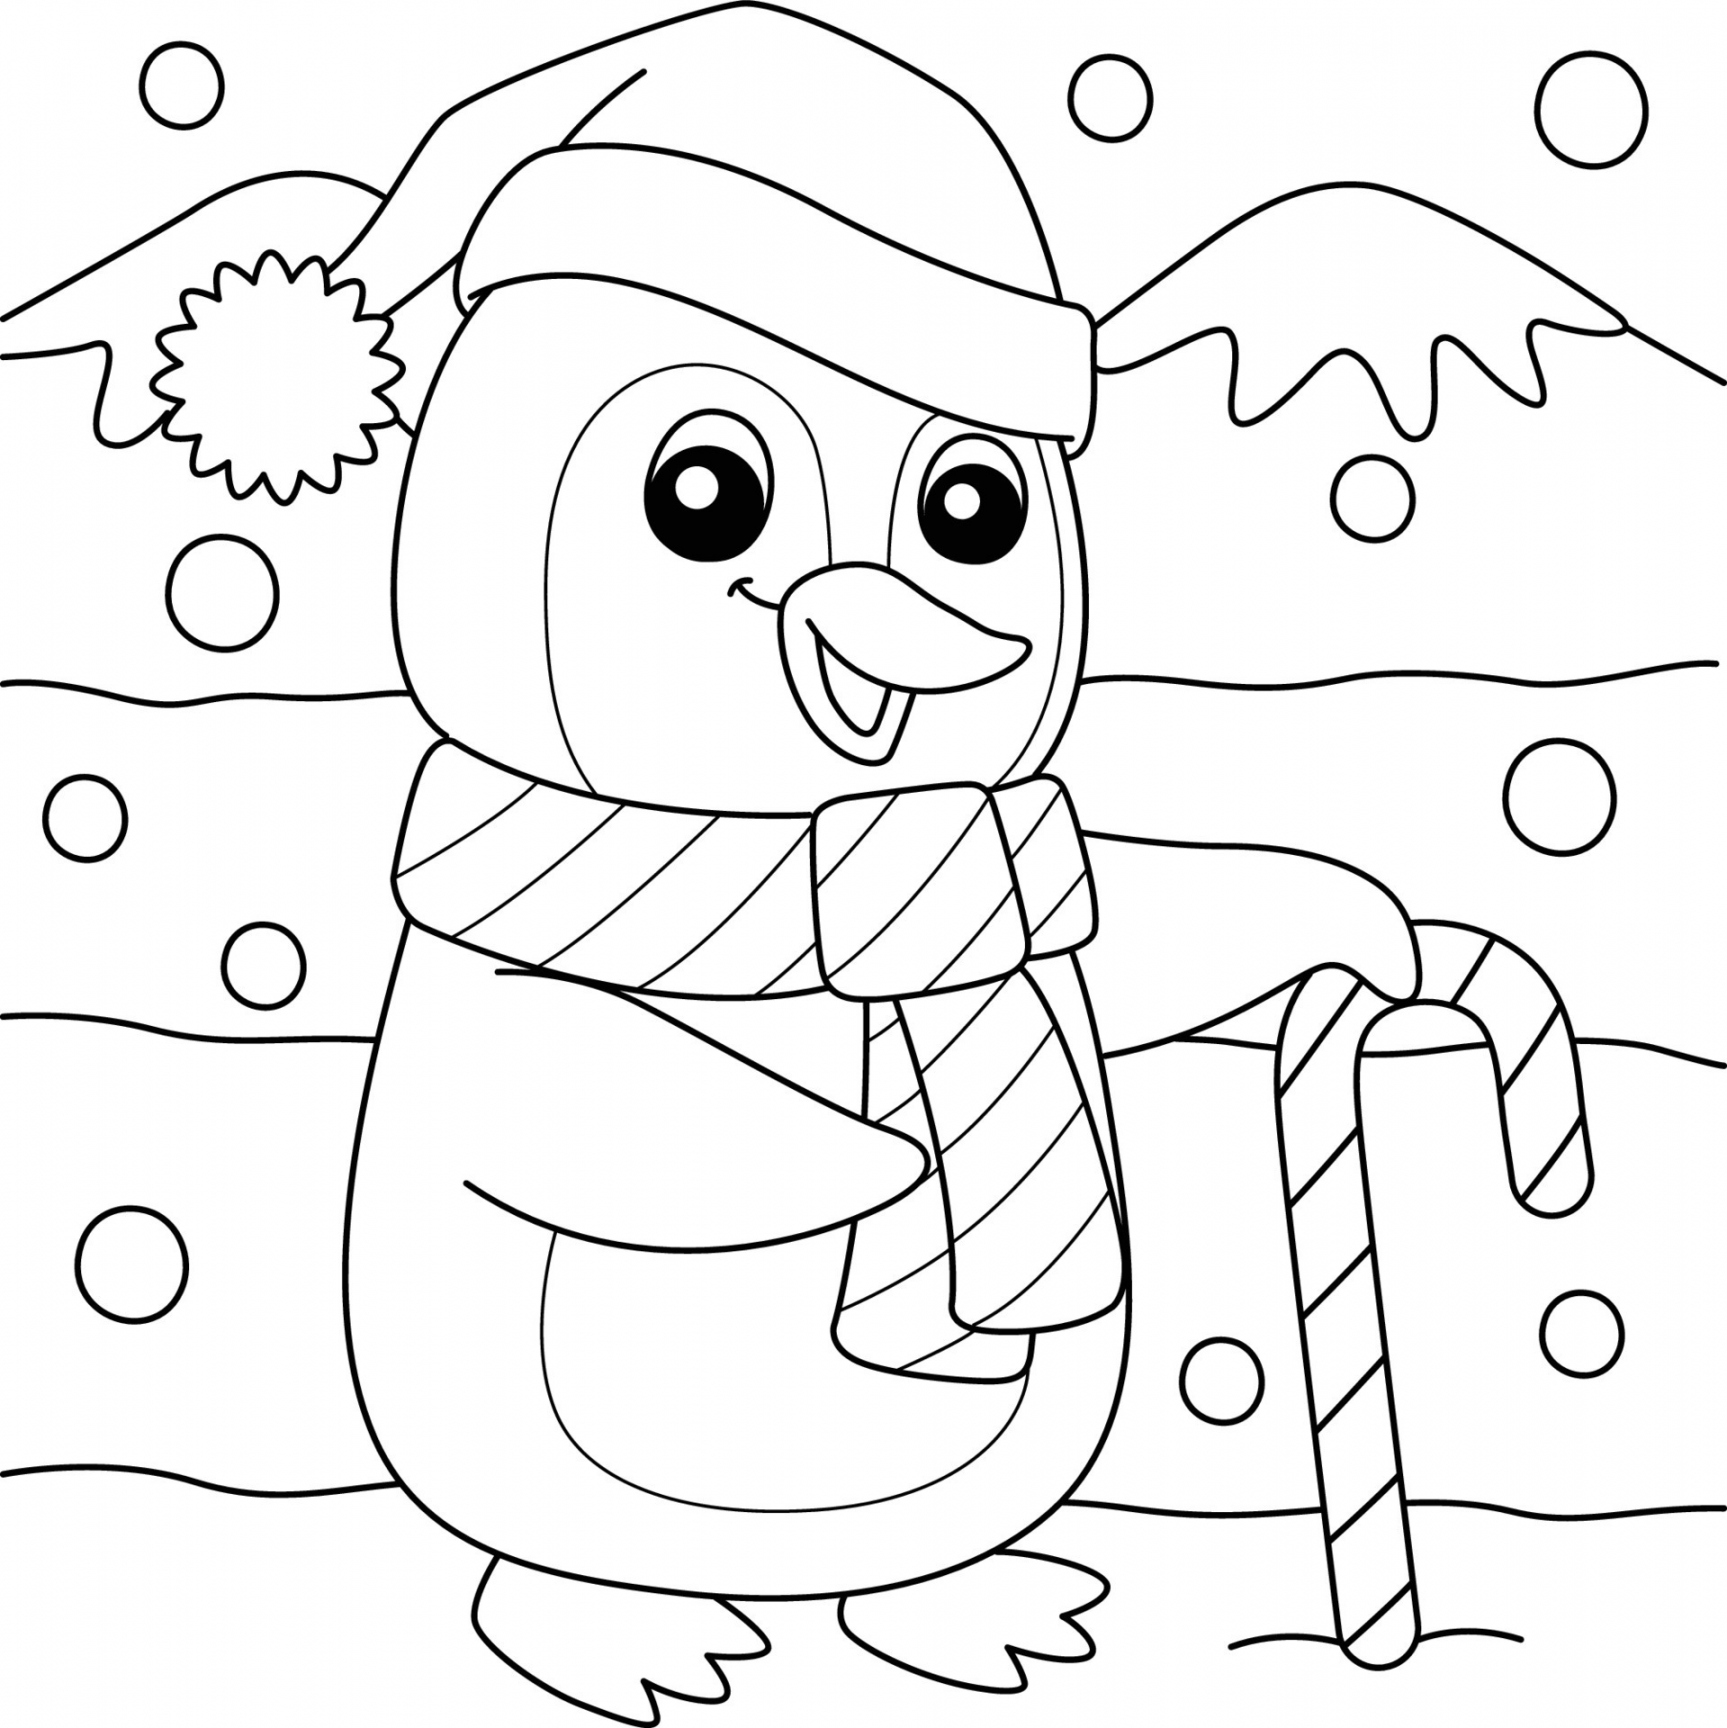 Free Printable Christmas Color Pages - Printable - Christmas Coloring Page Vector Art, Icons, and Graphics for Free